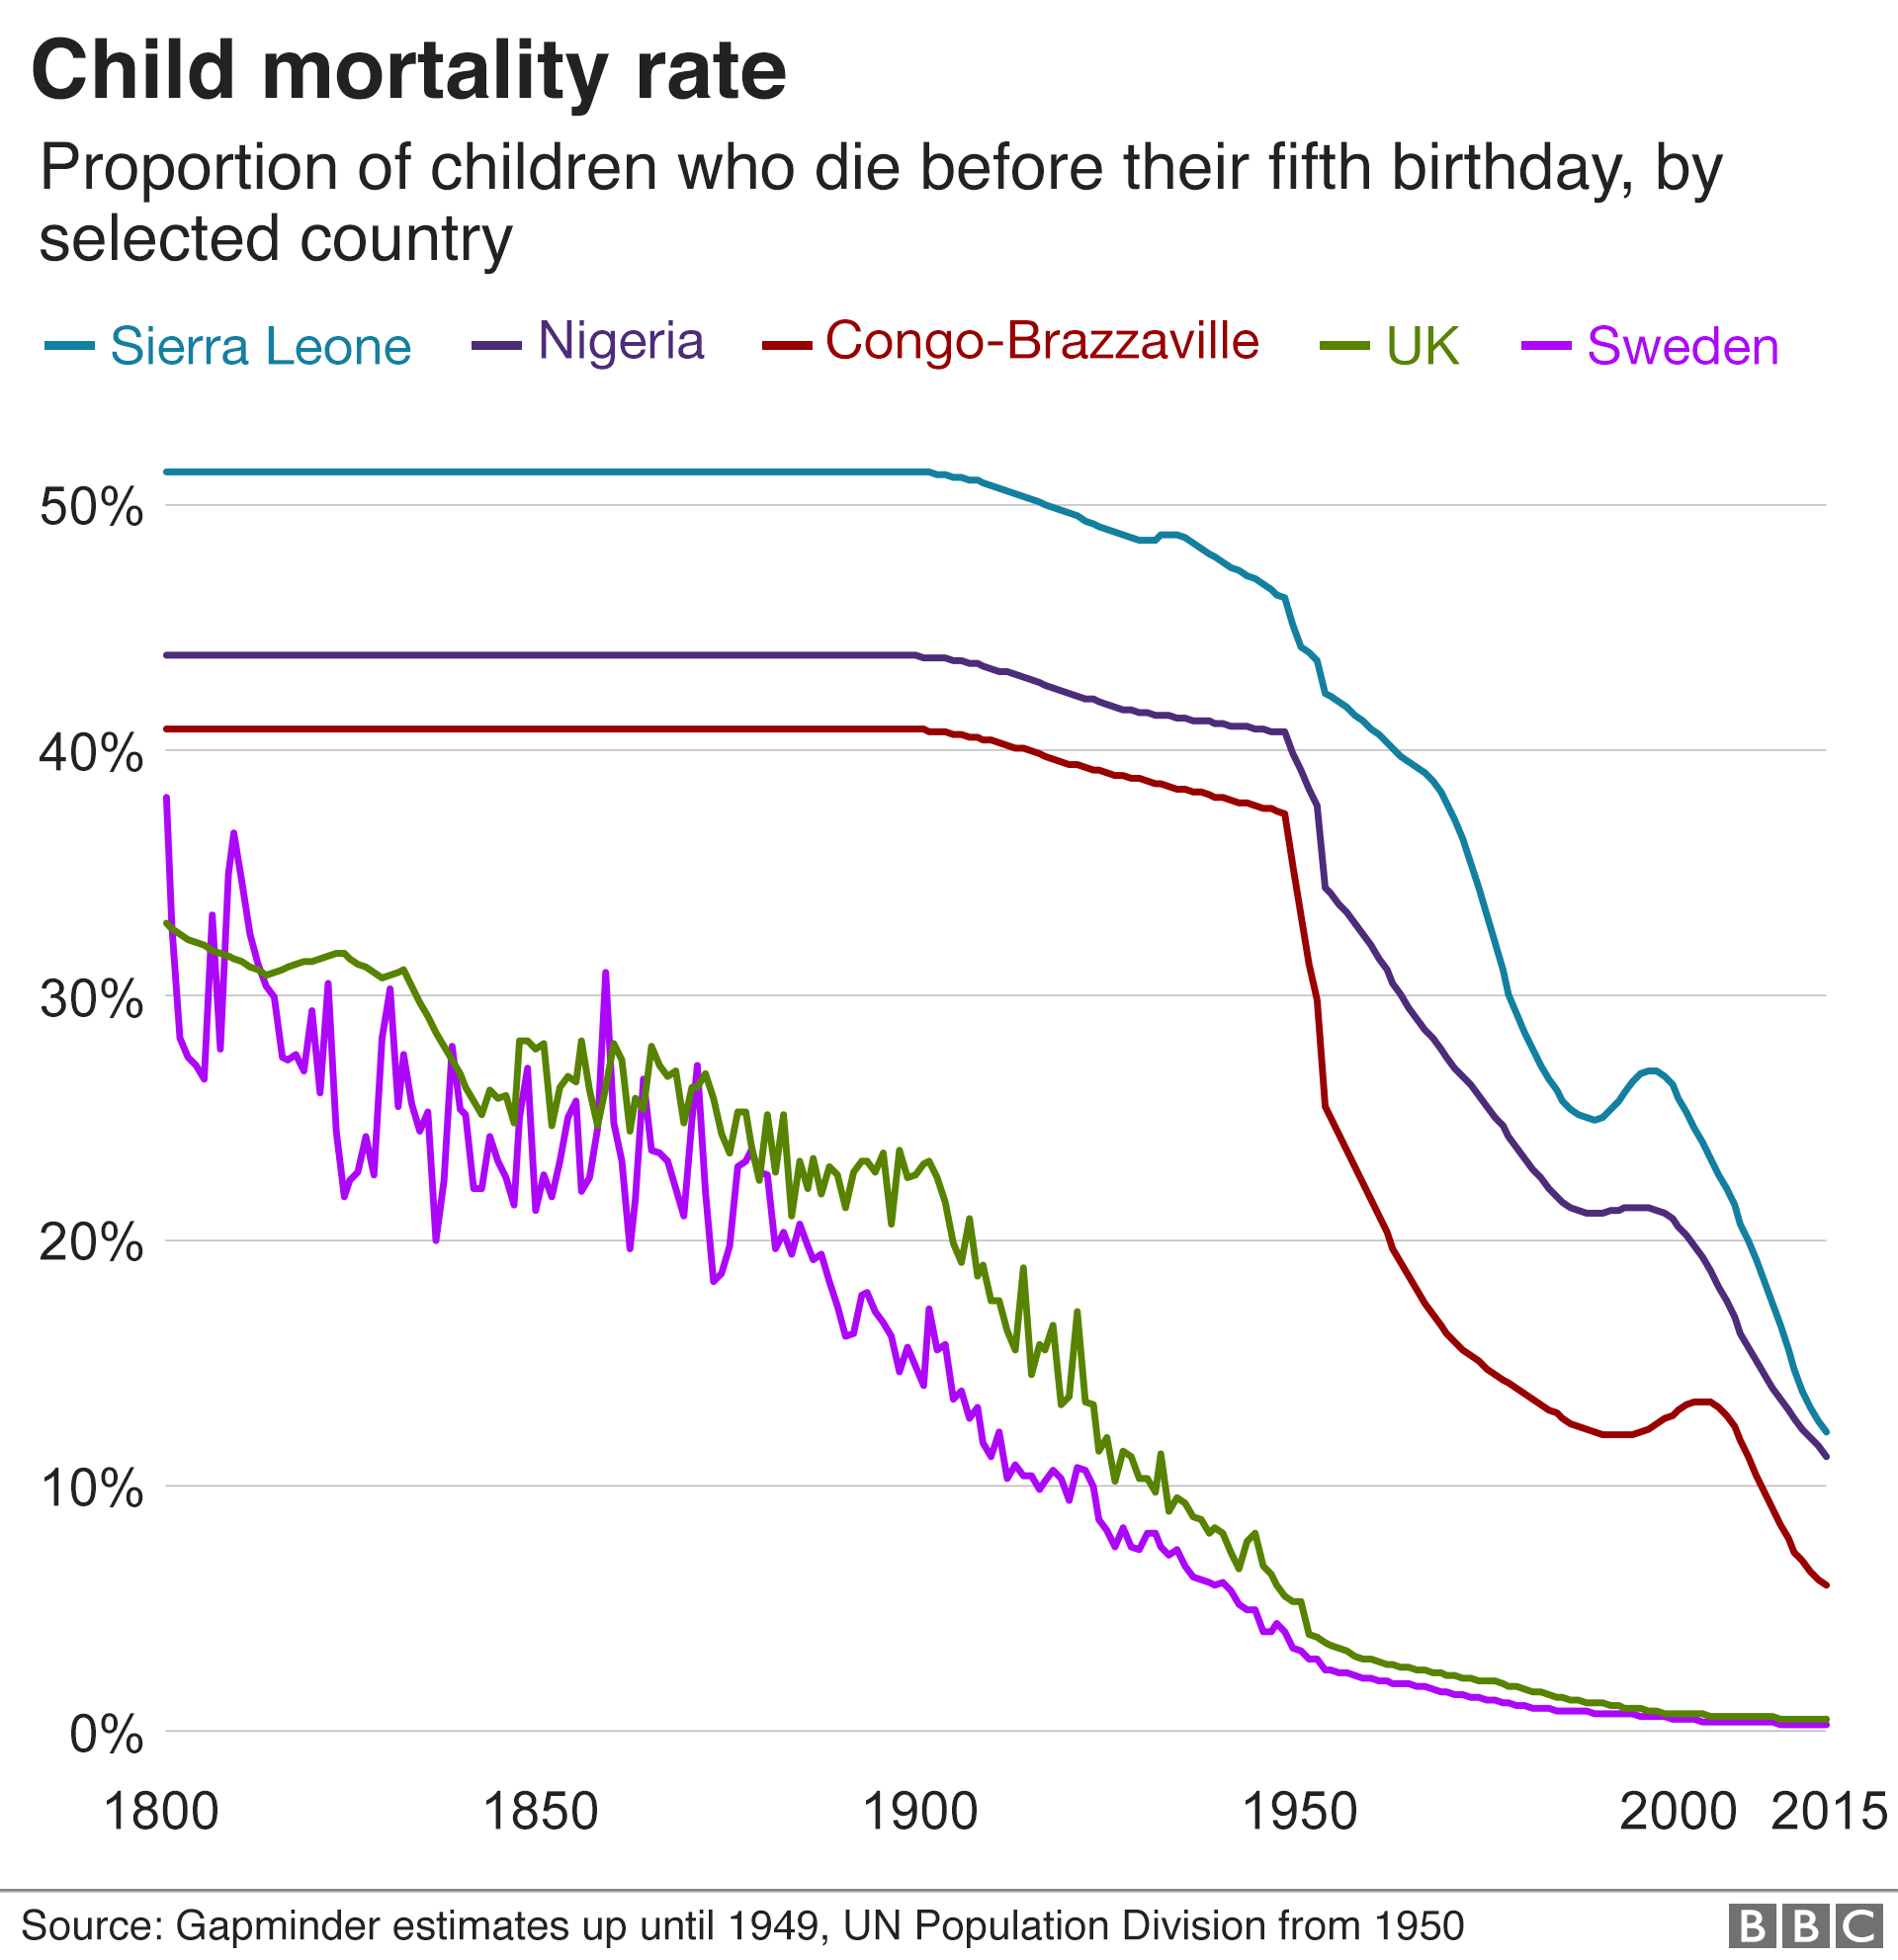 Child mortality rate by selected country